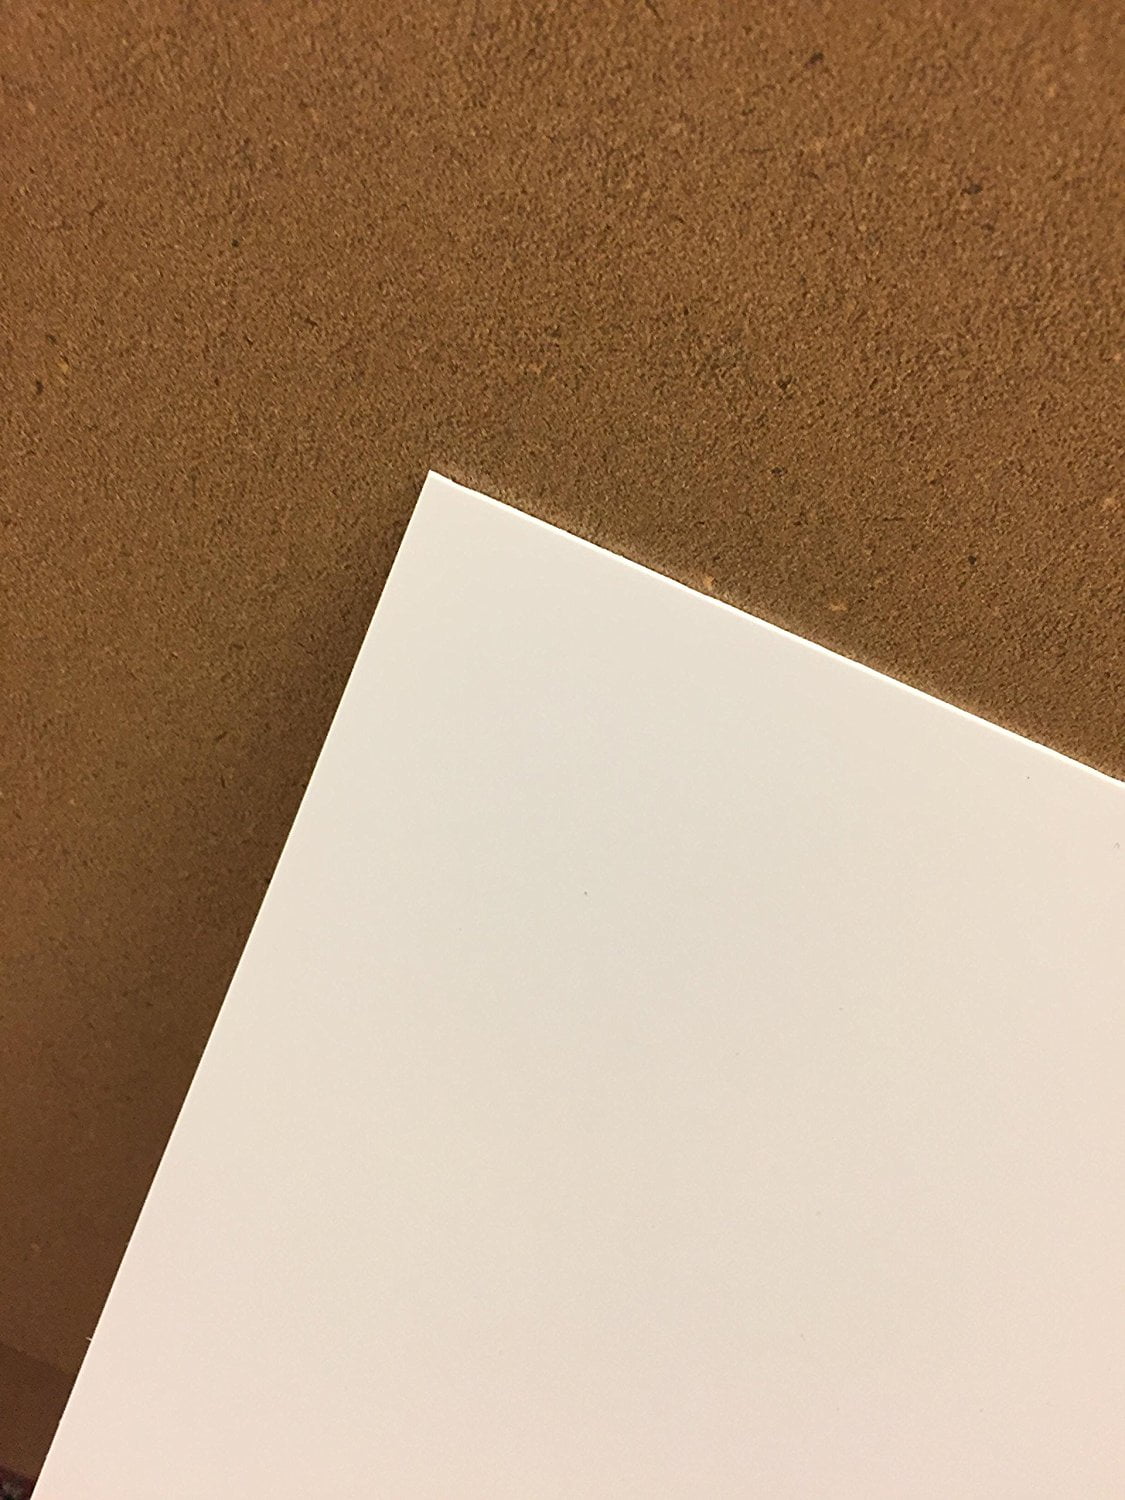 POLYSTYRENE PLASTIC SHEET .080" THICK 11" X 11"  CREME COLOR 